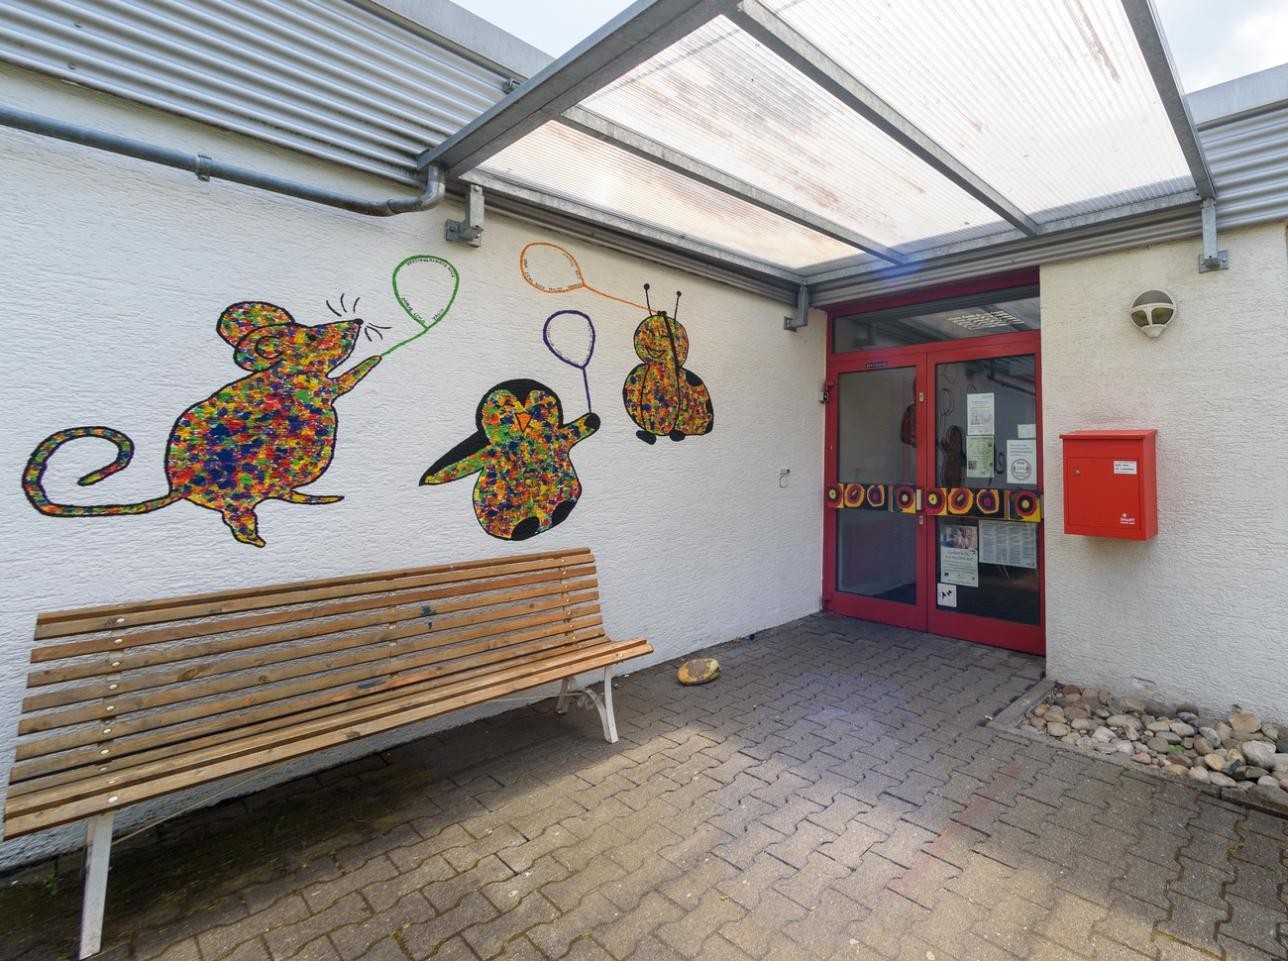 Entrance to St. Laurentius daycare center 